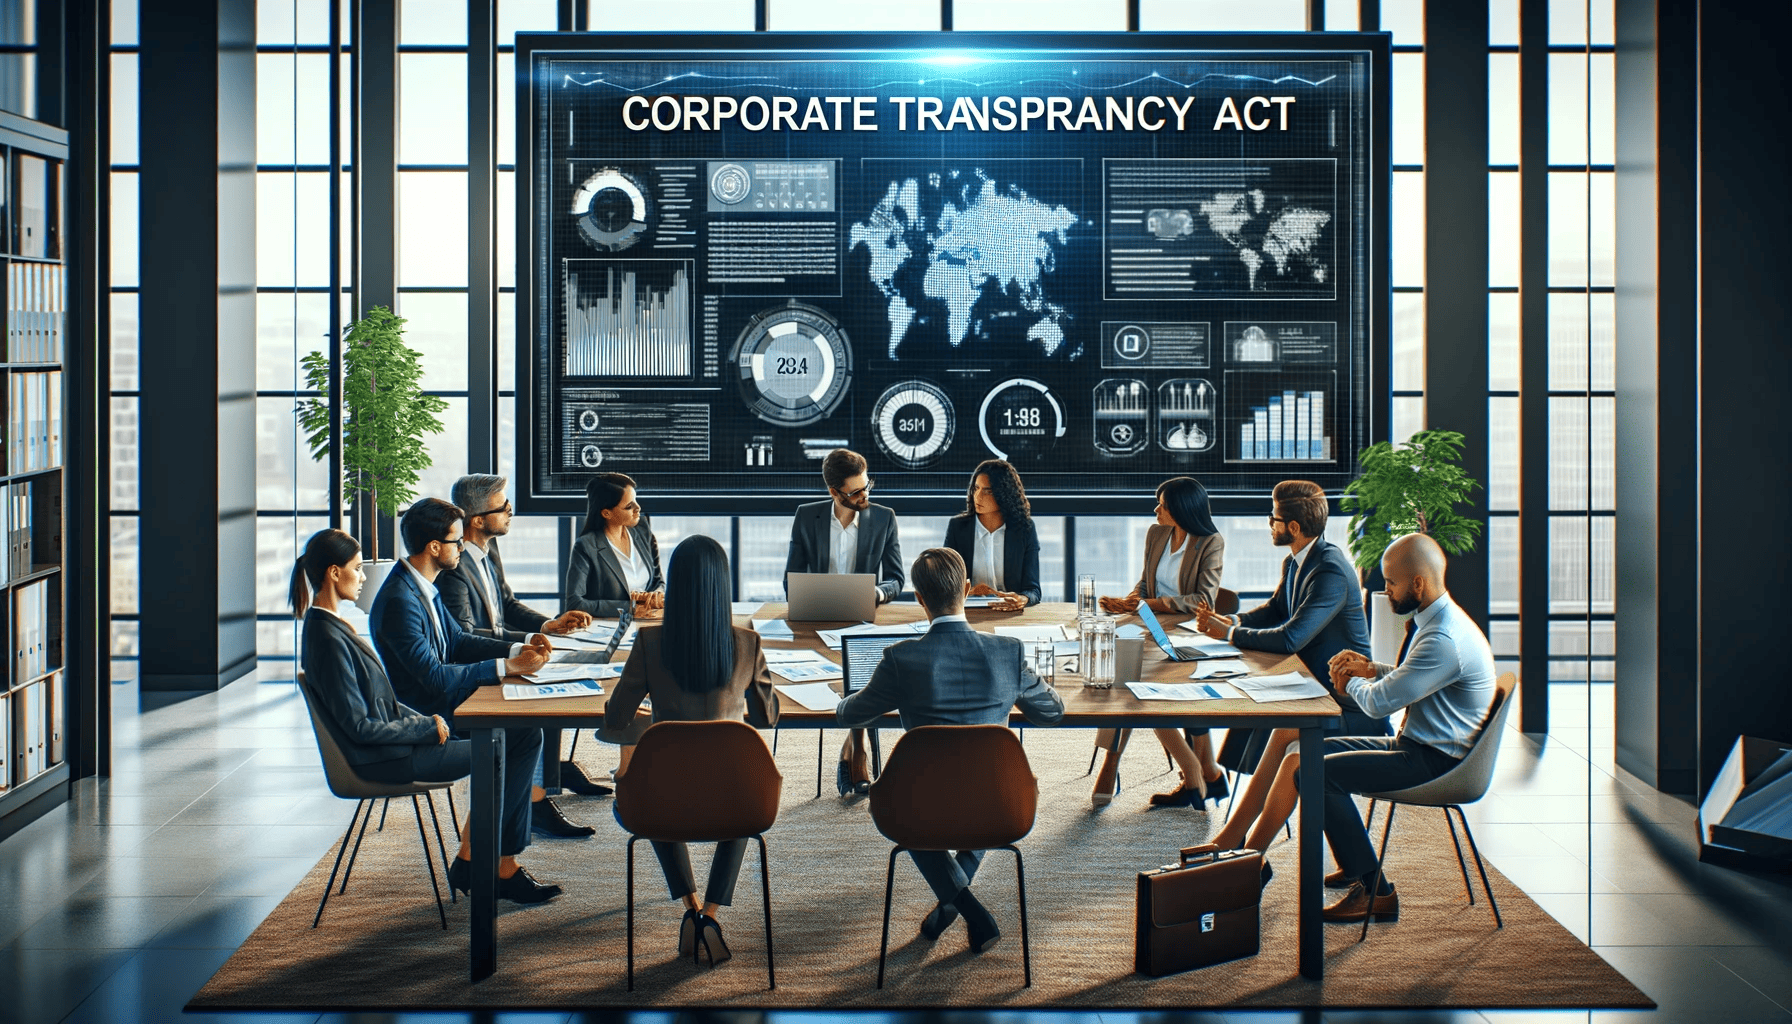 Discussing the key aspects and benefits of the Corporate Transparency Act (CTA) for enhanced corporate accountability and transparency.